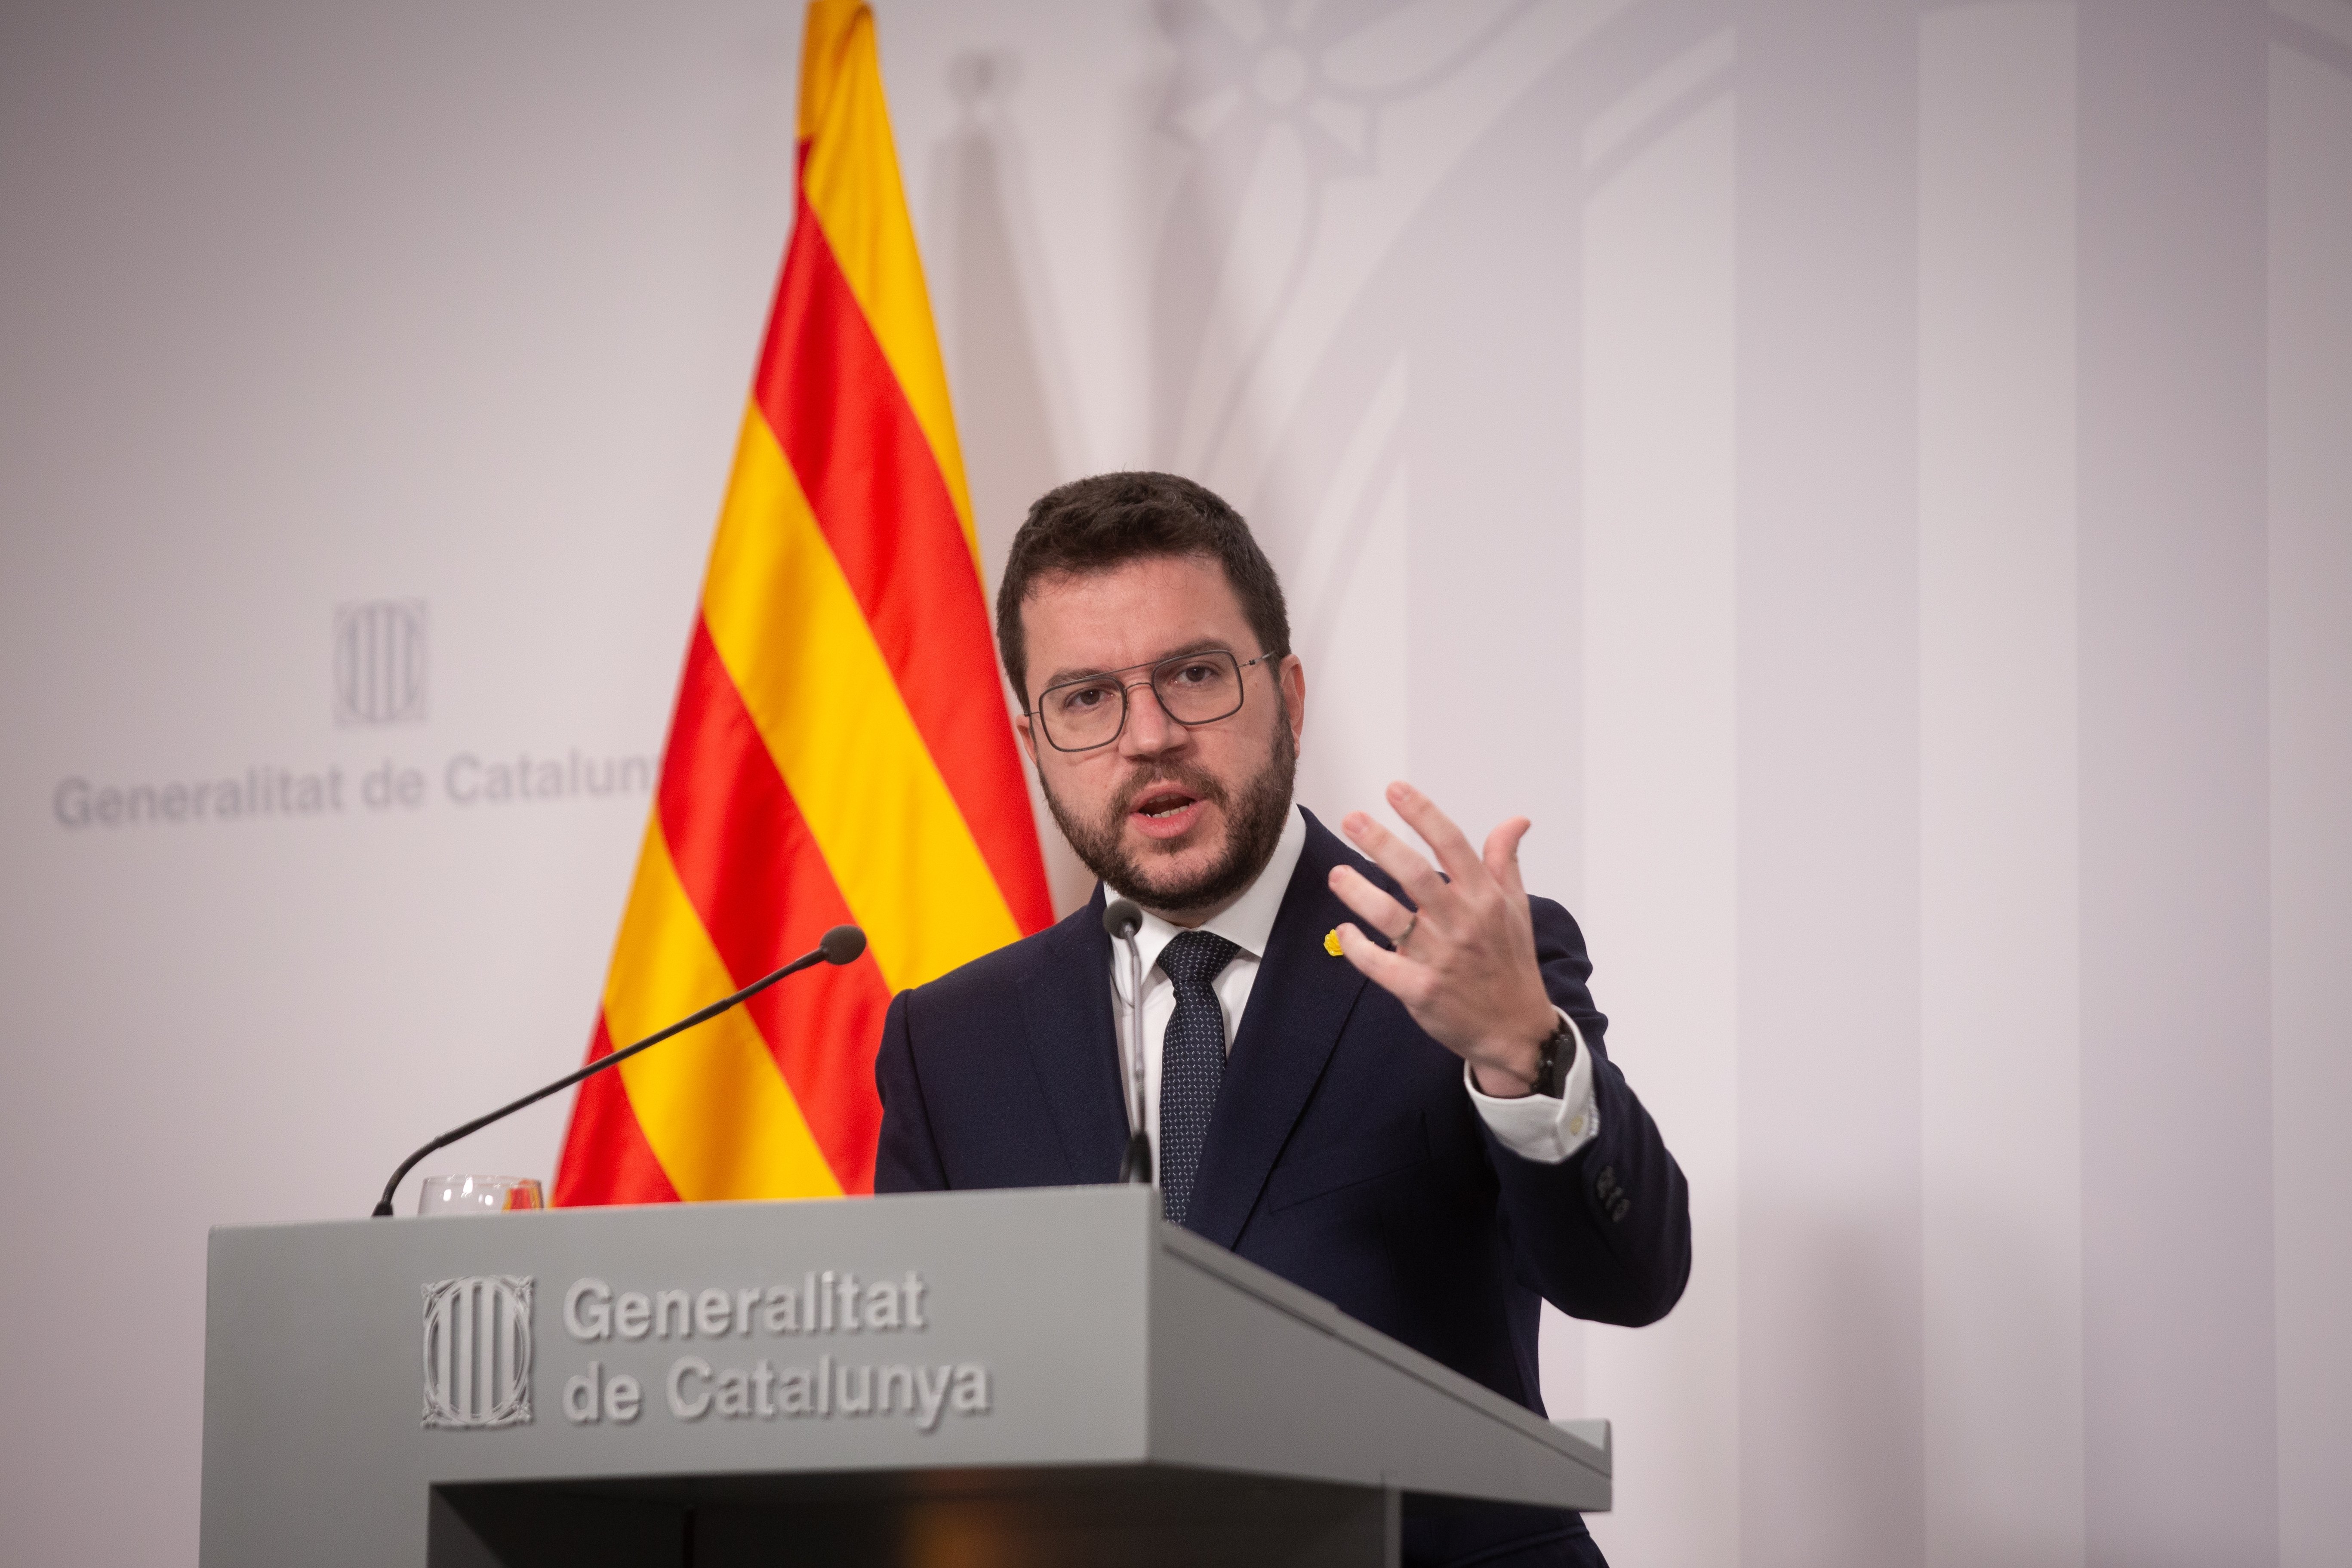 Aragonès asks for all of Spain to apply Covid measures as tough as Catalonia's